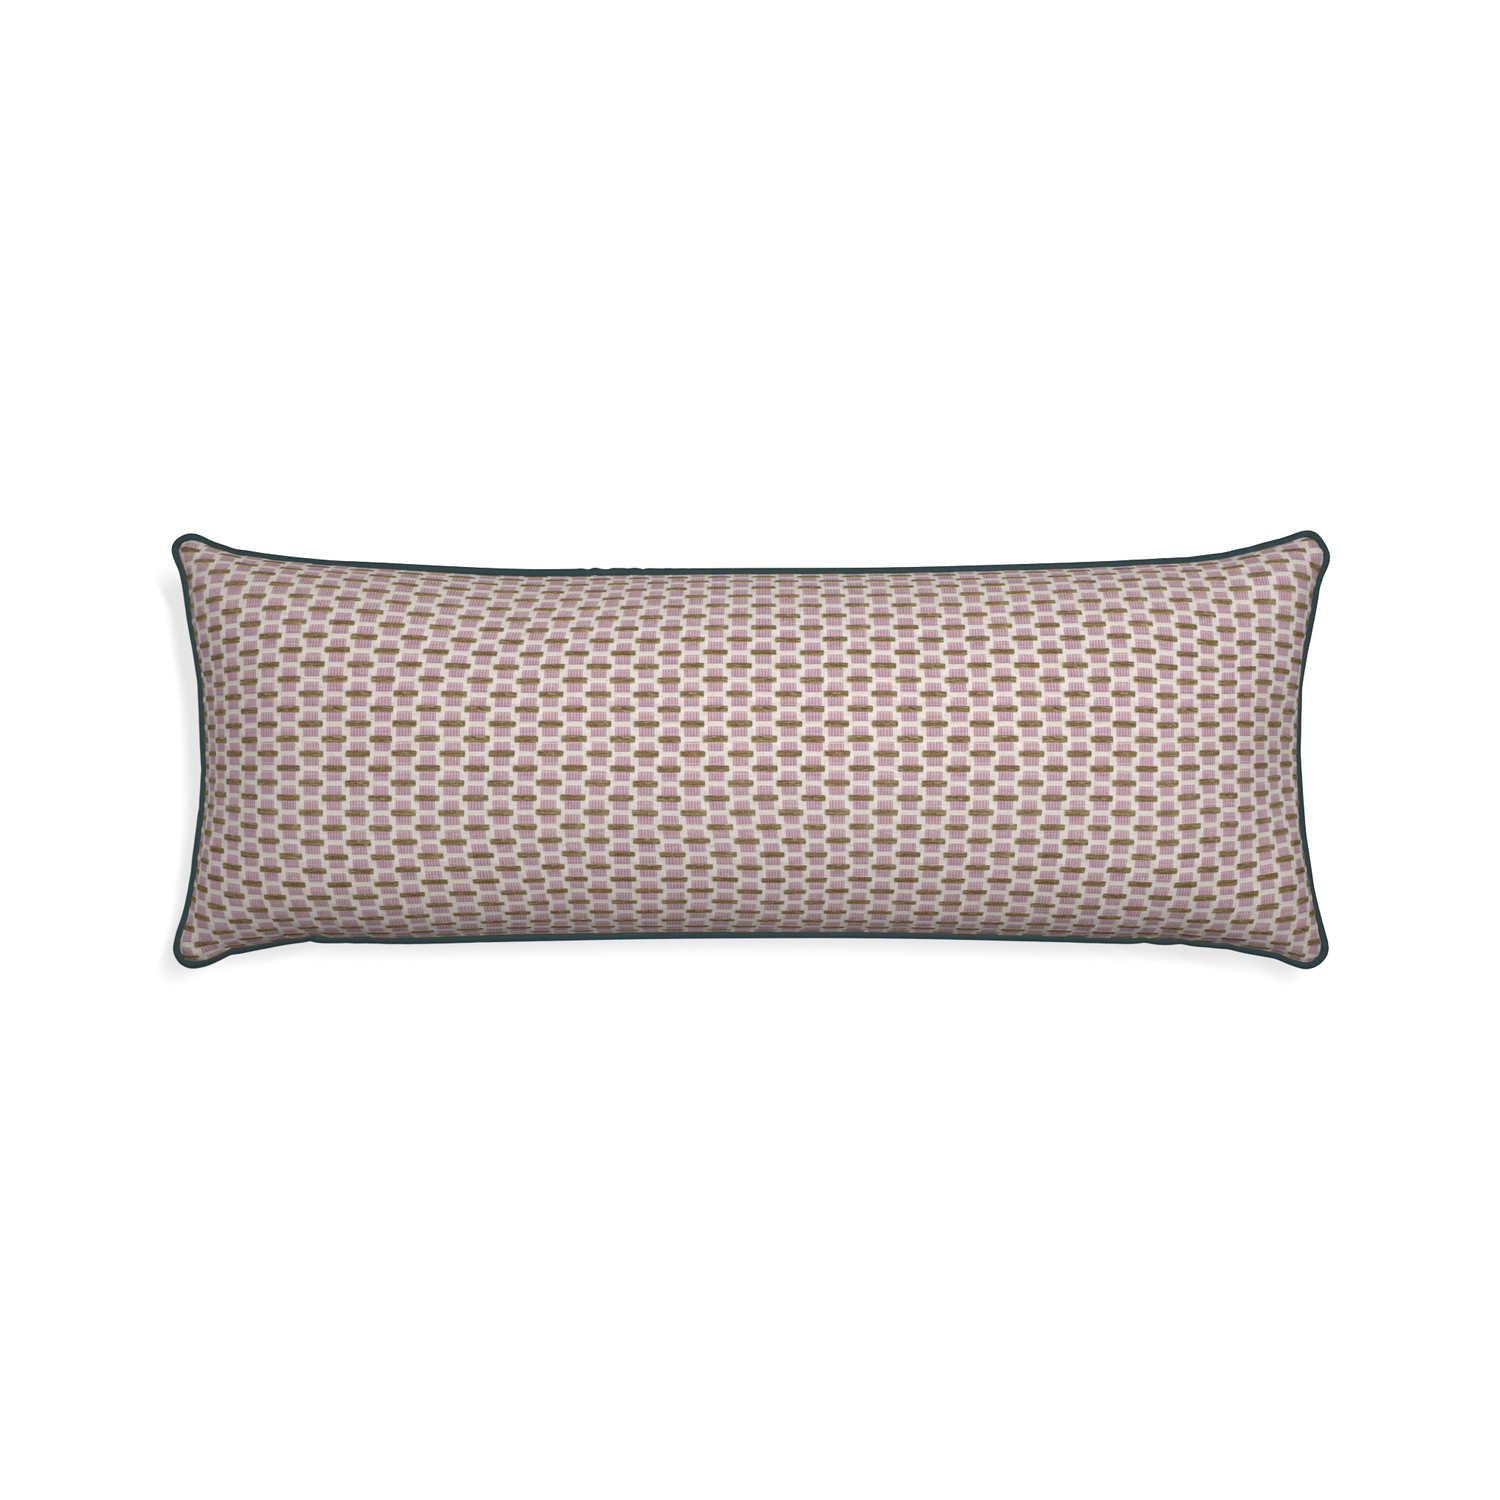 Xl-lumbar willow orchid custom pink geometric chenillepillow with p piping on white background